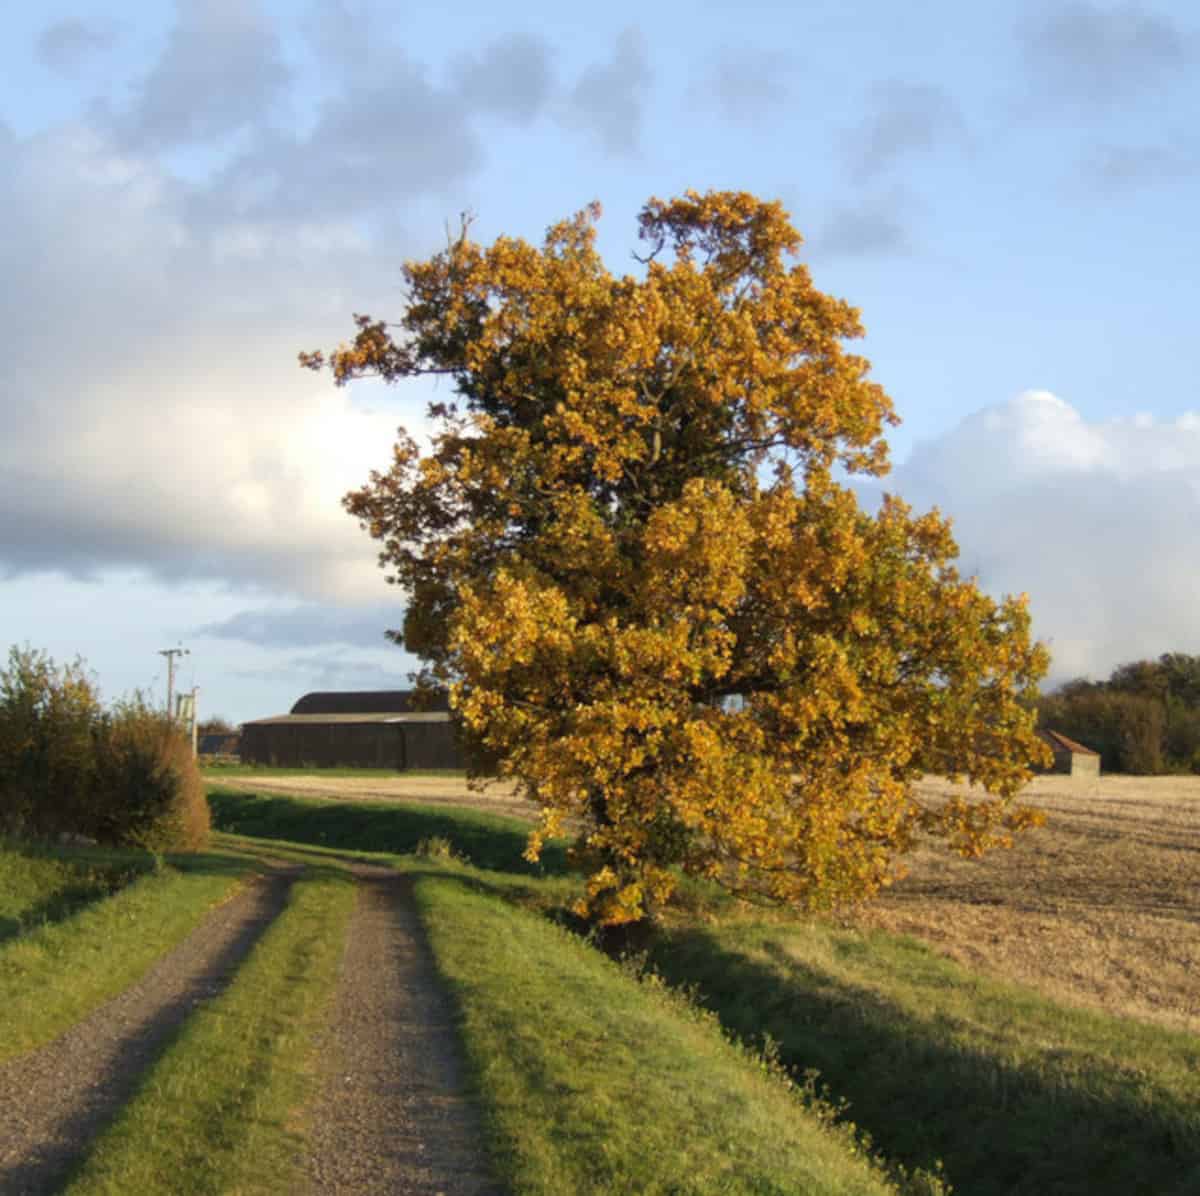 Wide angle view of a golden oak tree at edge of farmers field